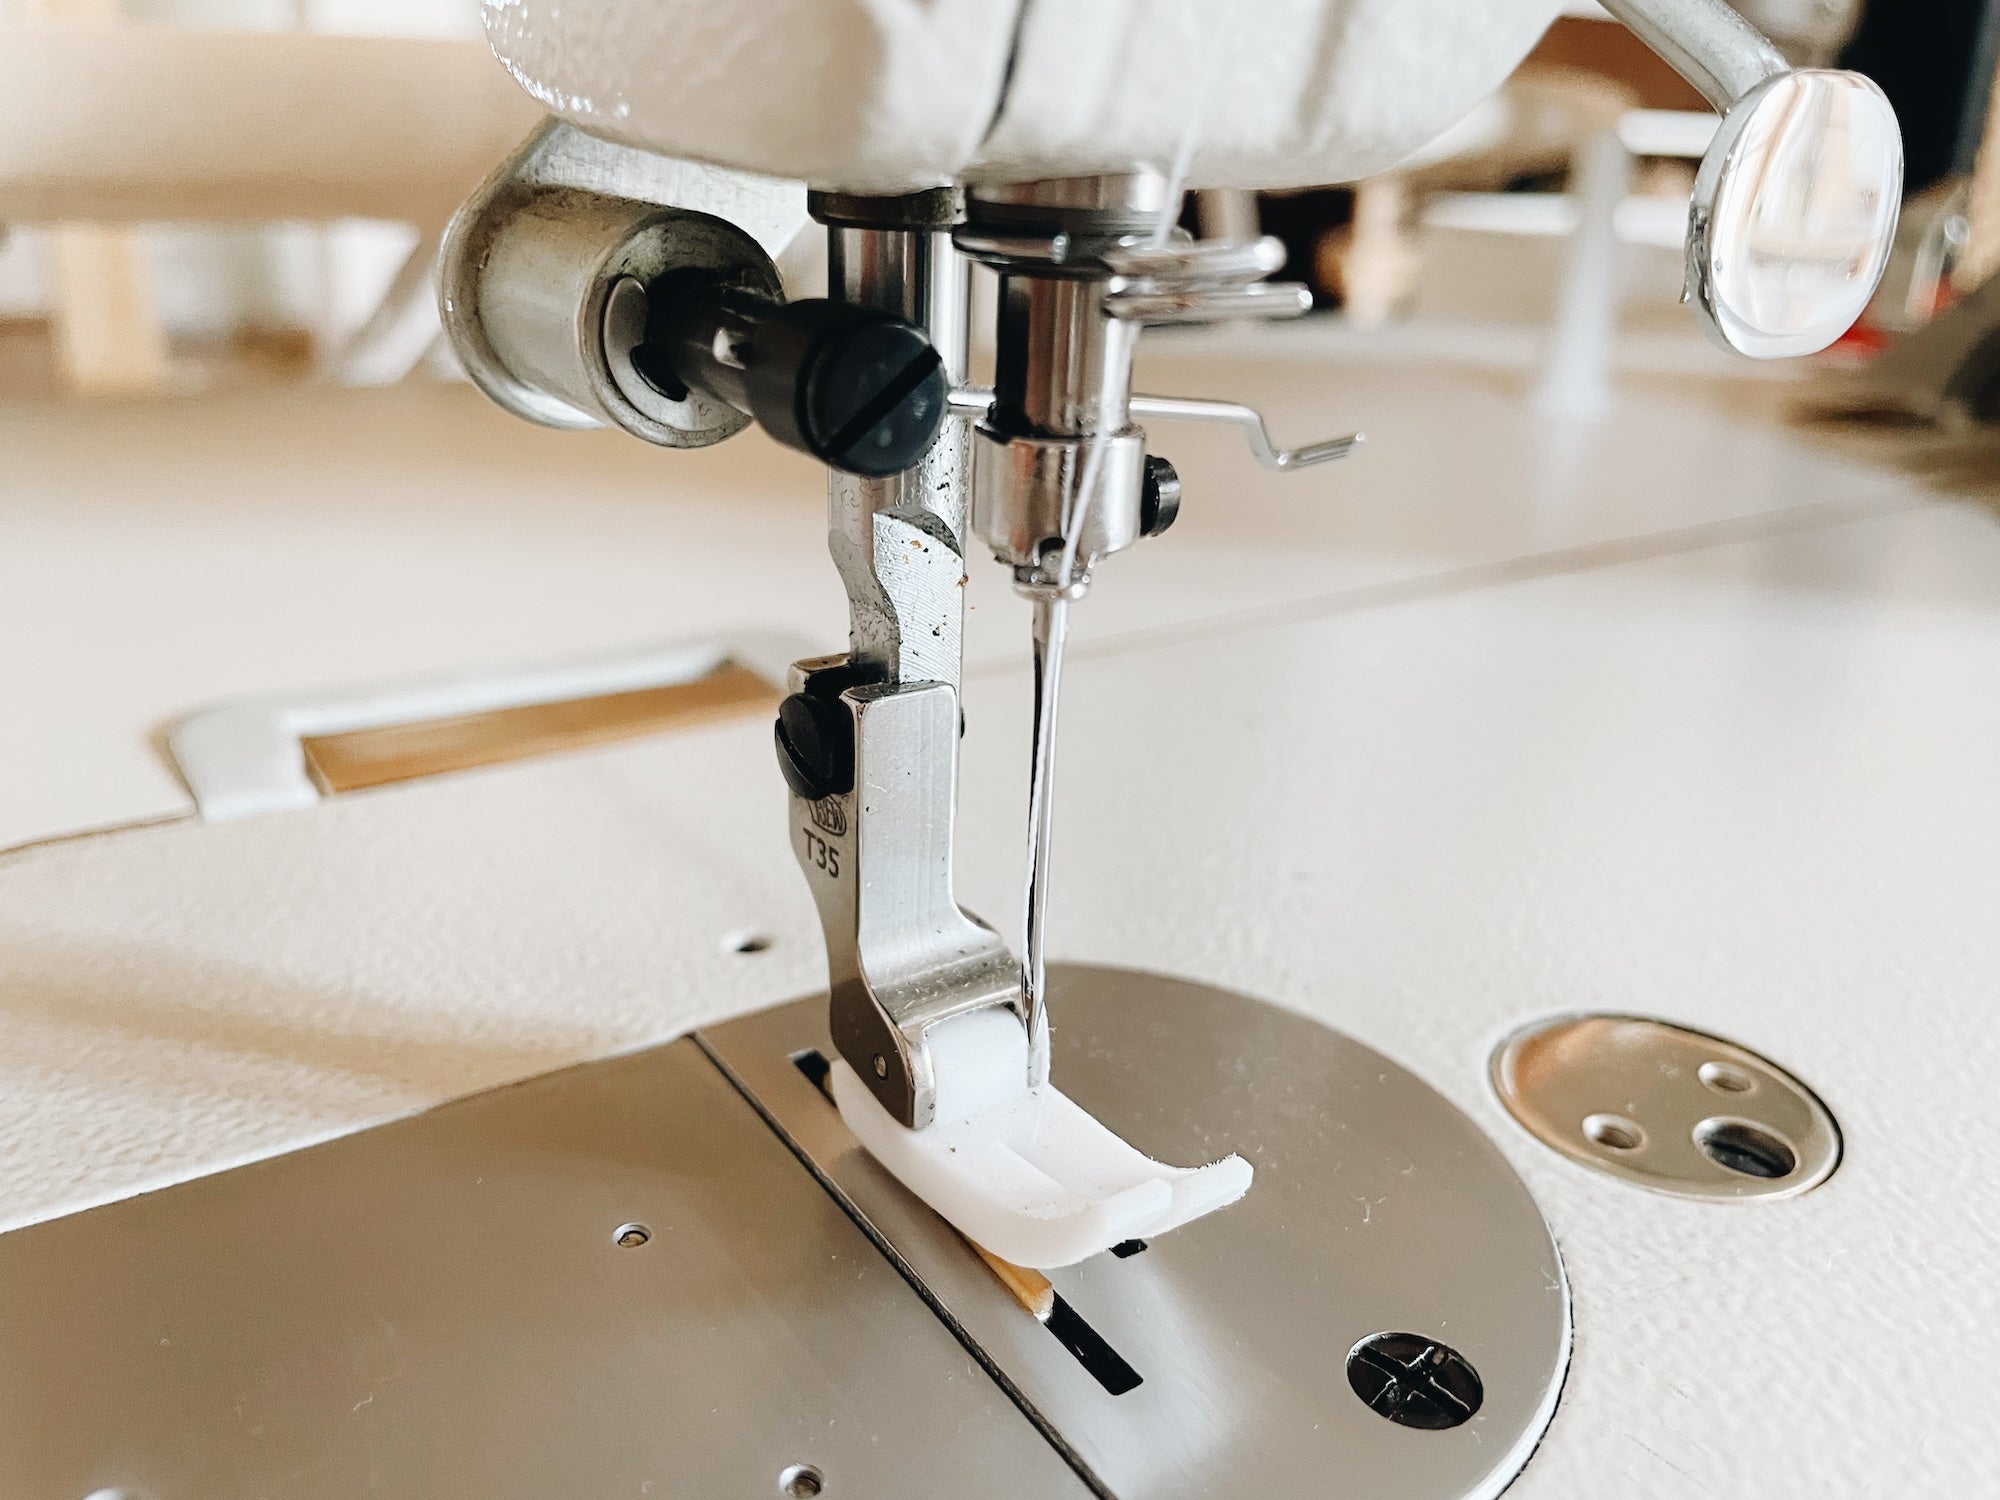 Our industrial sewing machine on which all bags are sewn